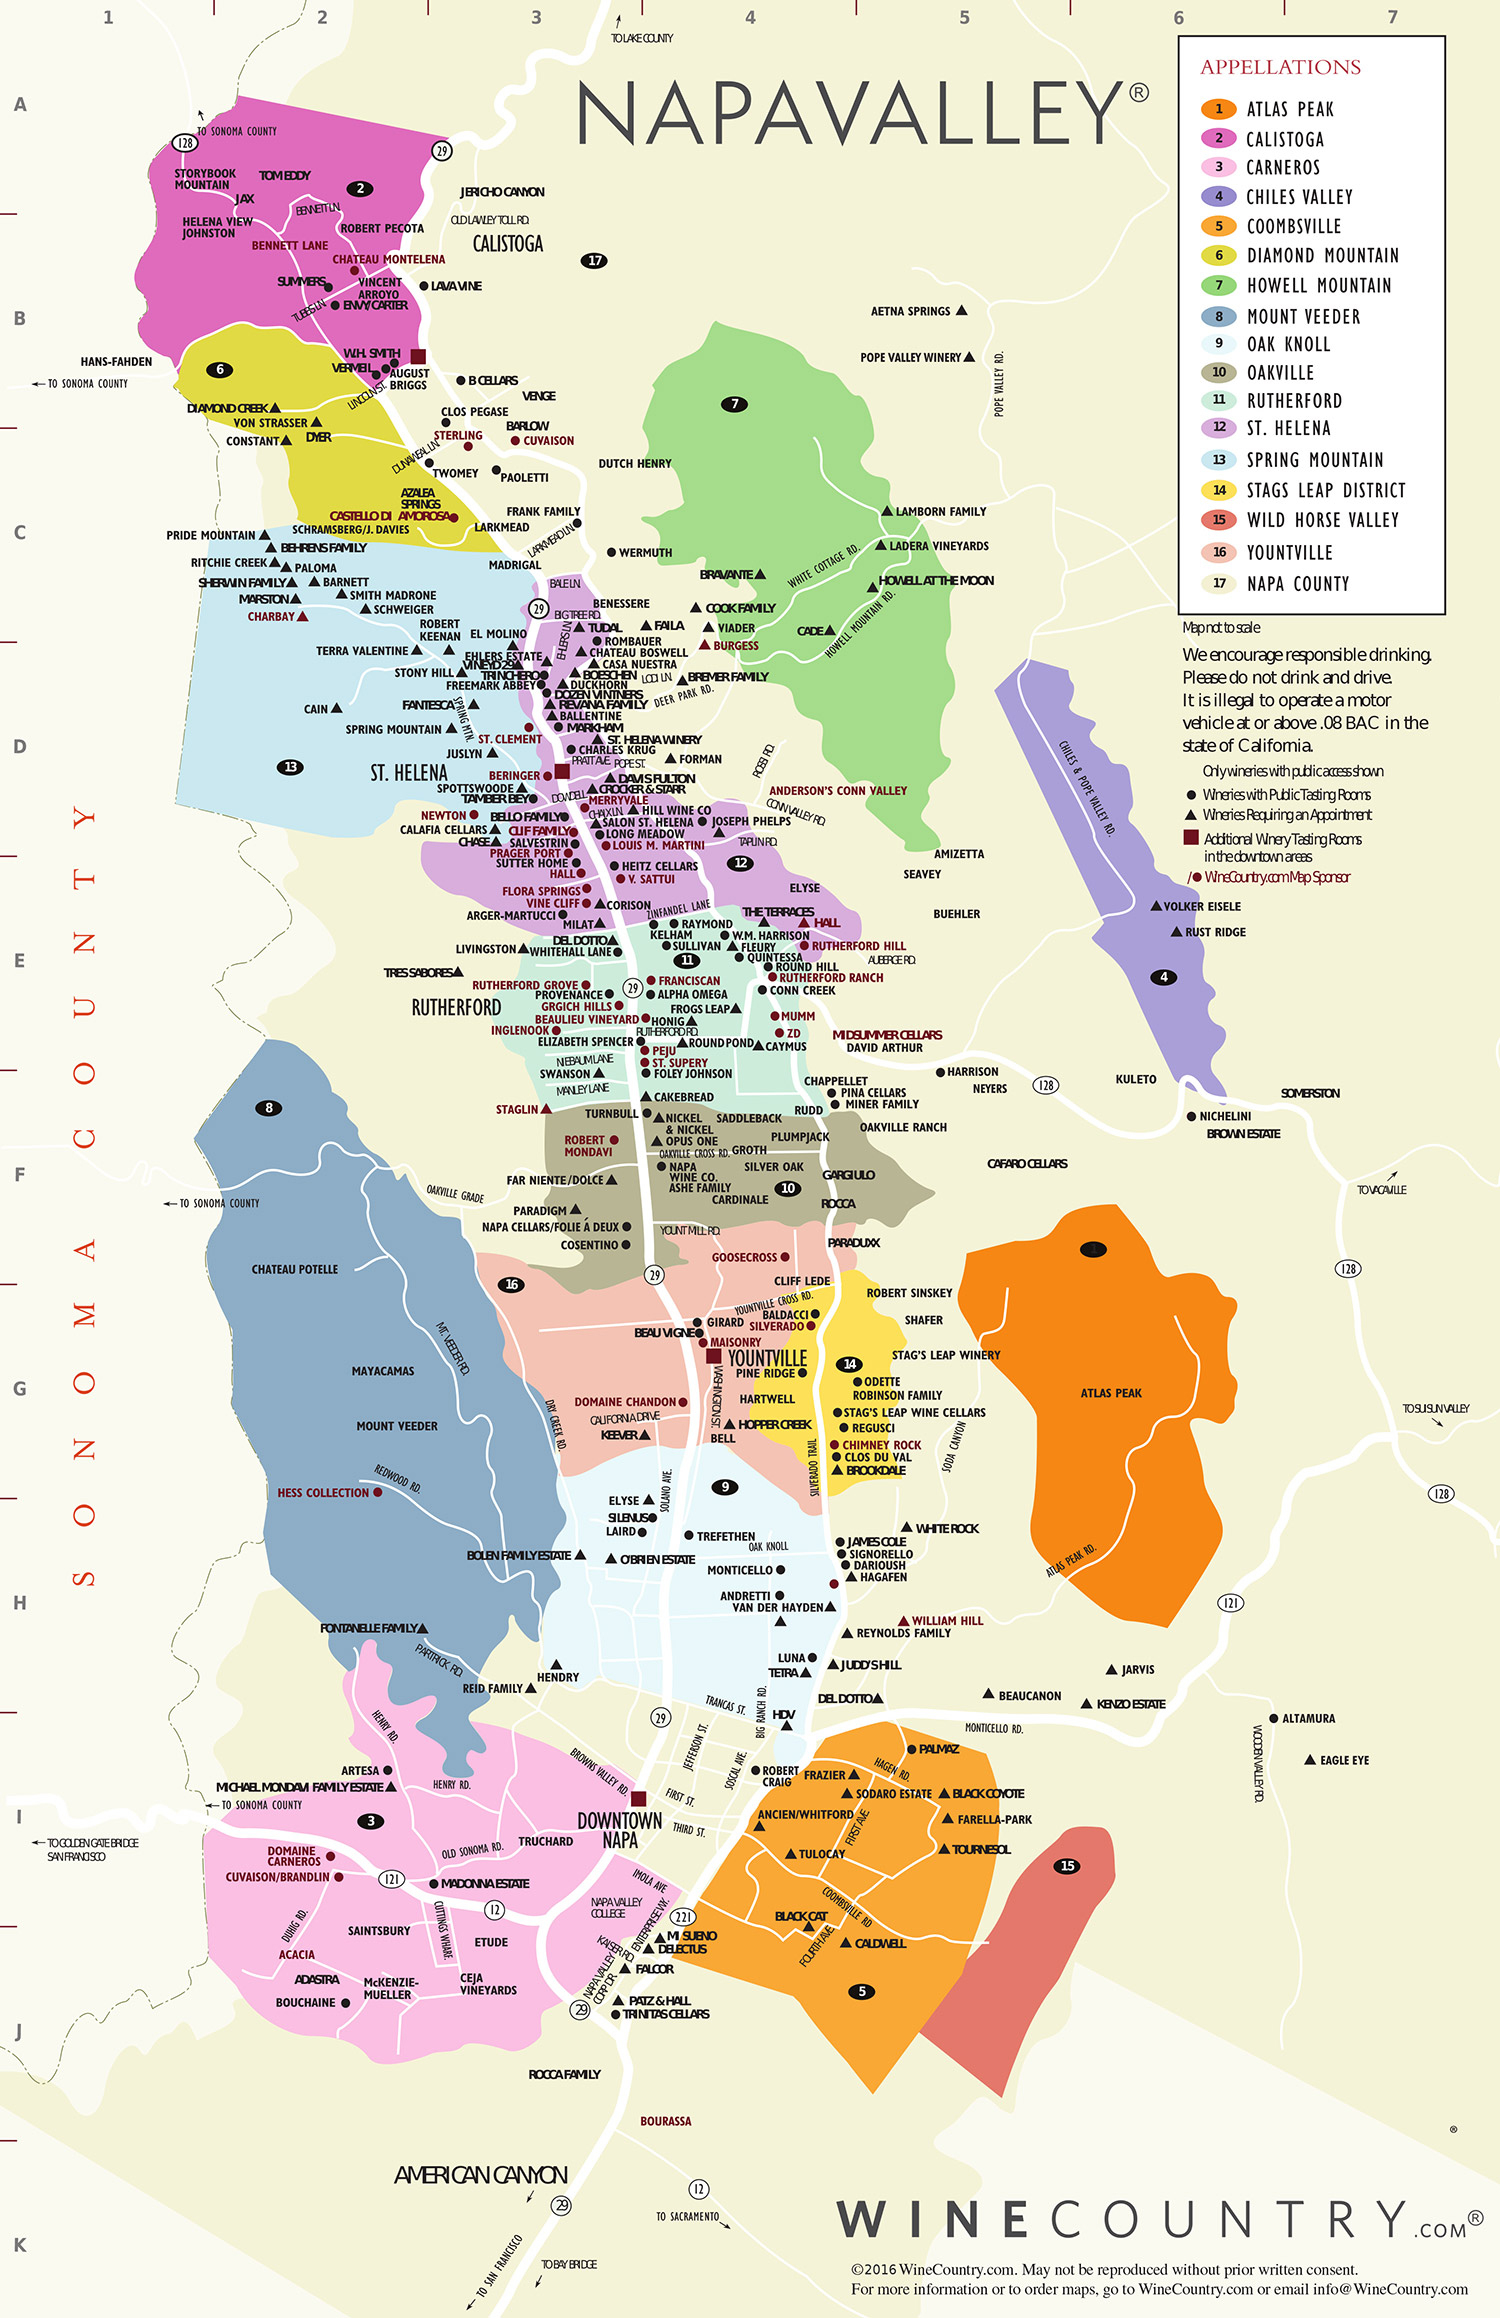 Napa Valley Wine Country Maps - Napavalley - California Wine Trail Map